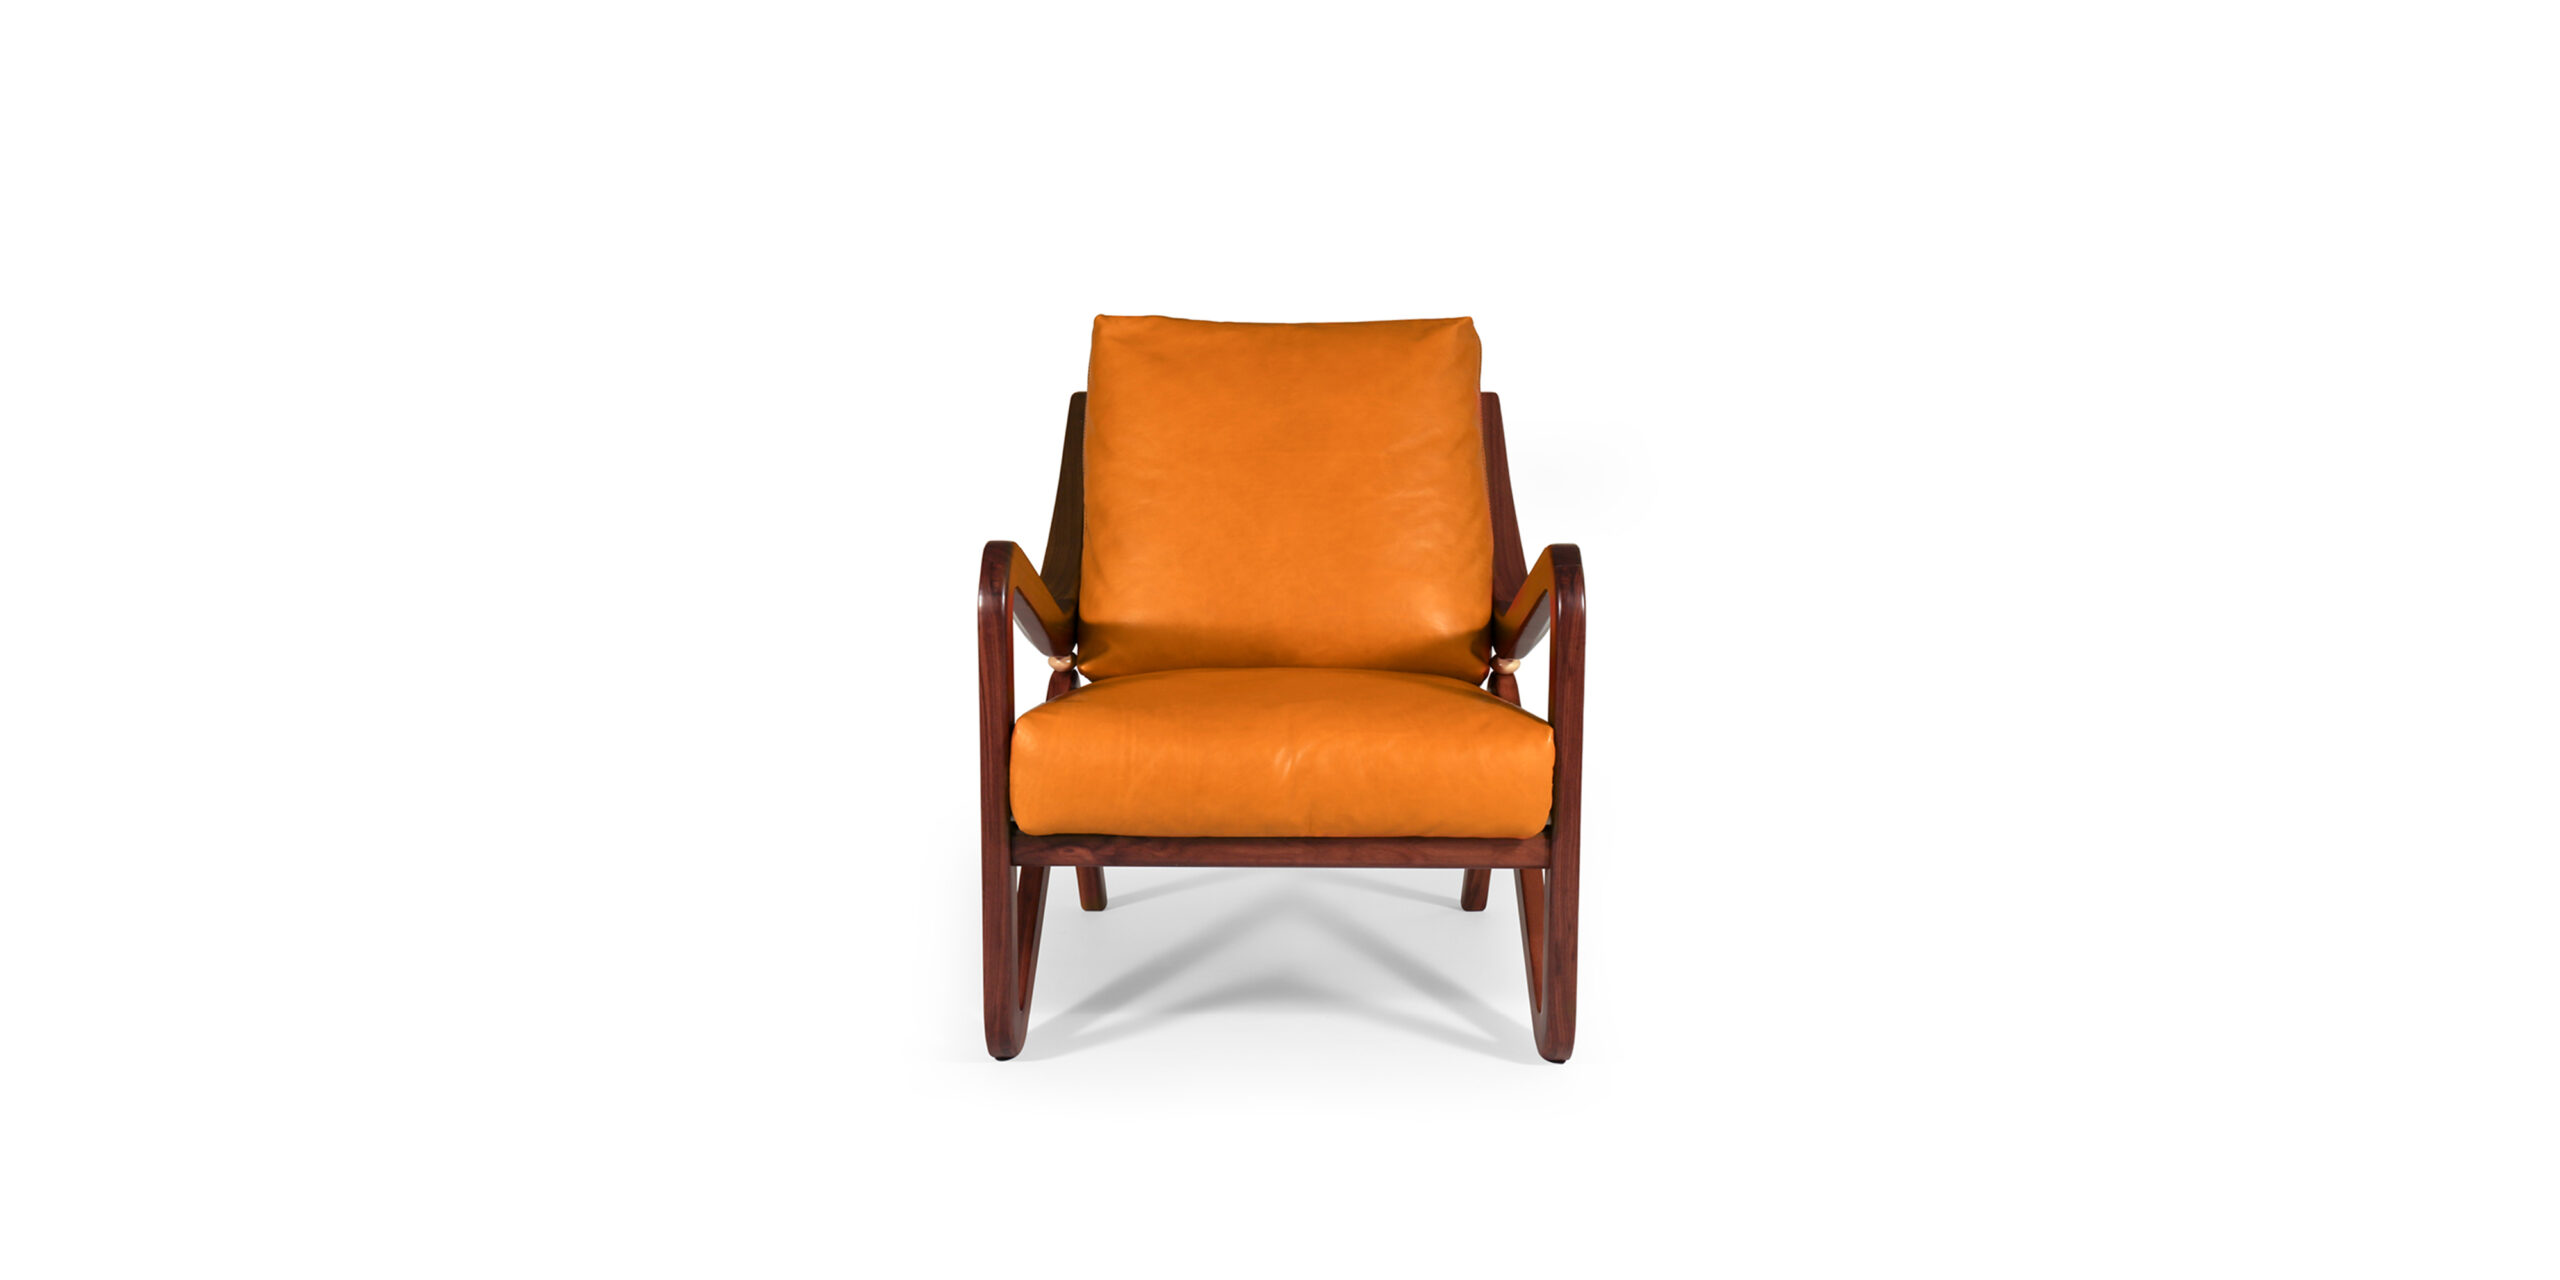 Discover Timeless Classic Armchair Designs That'll Blow Your Mind!